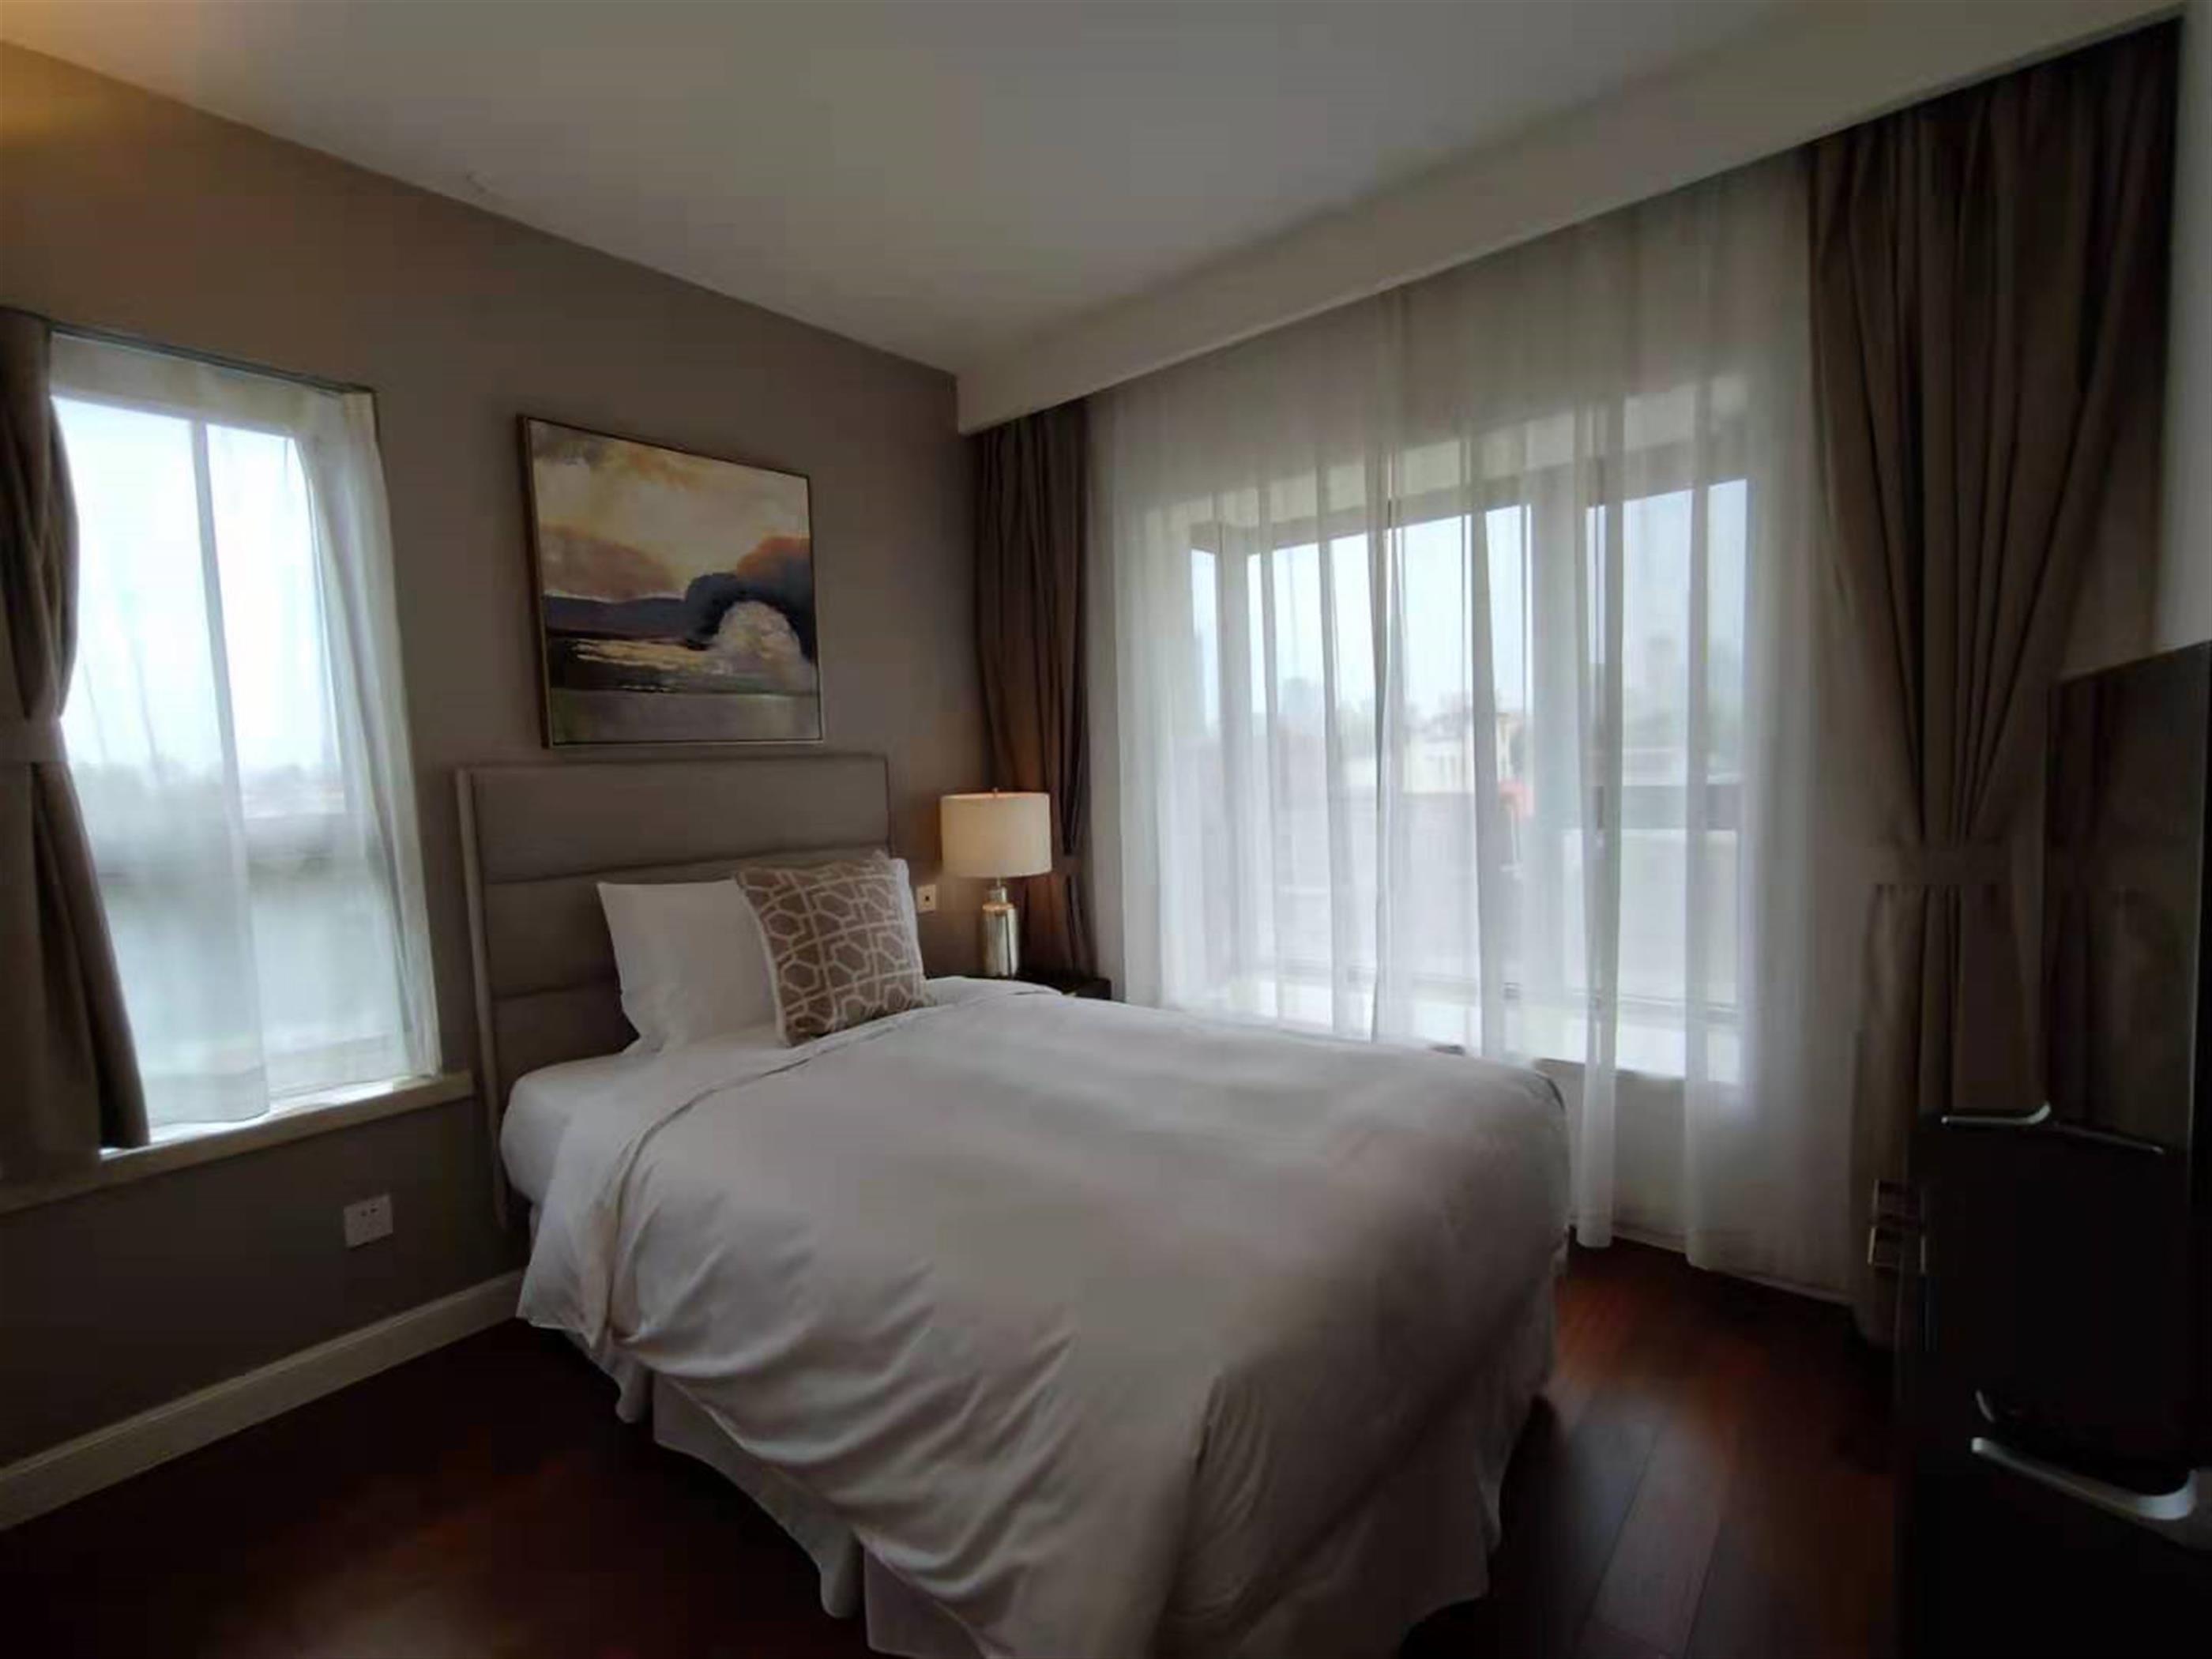 3rd bedroom Luxurious FFC 3BR+Office Service Apartment nr LN 1/9/10/12 for Rent in Shanghai